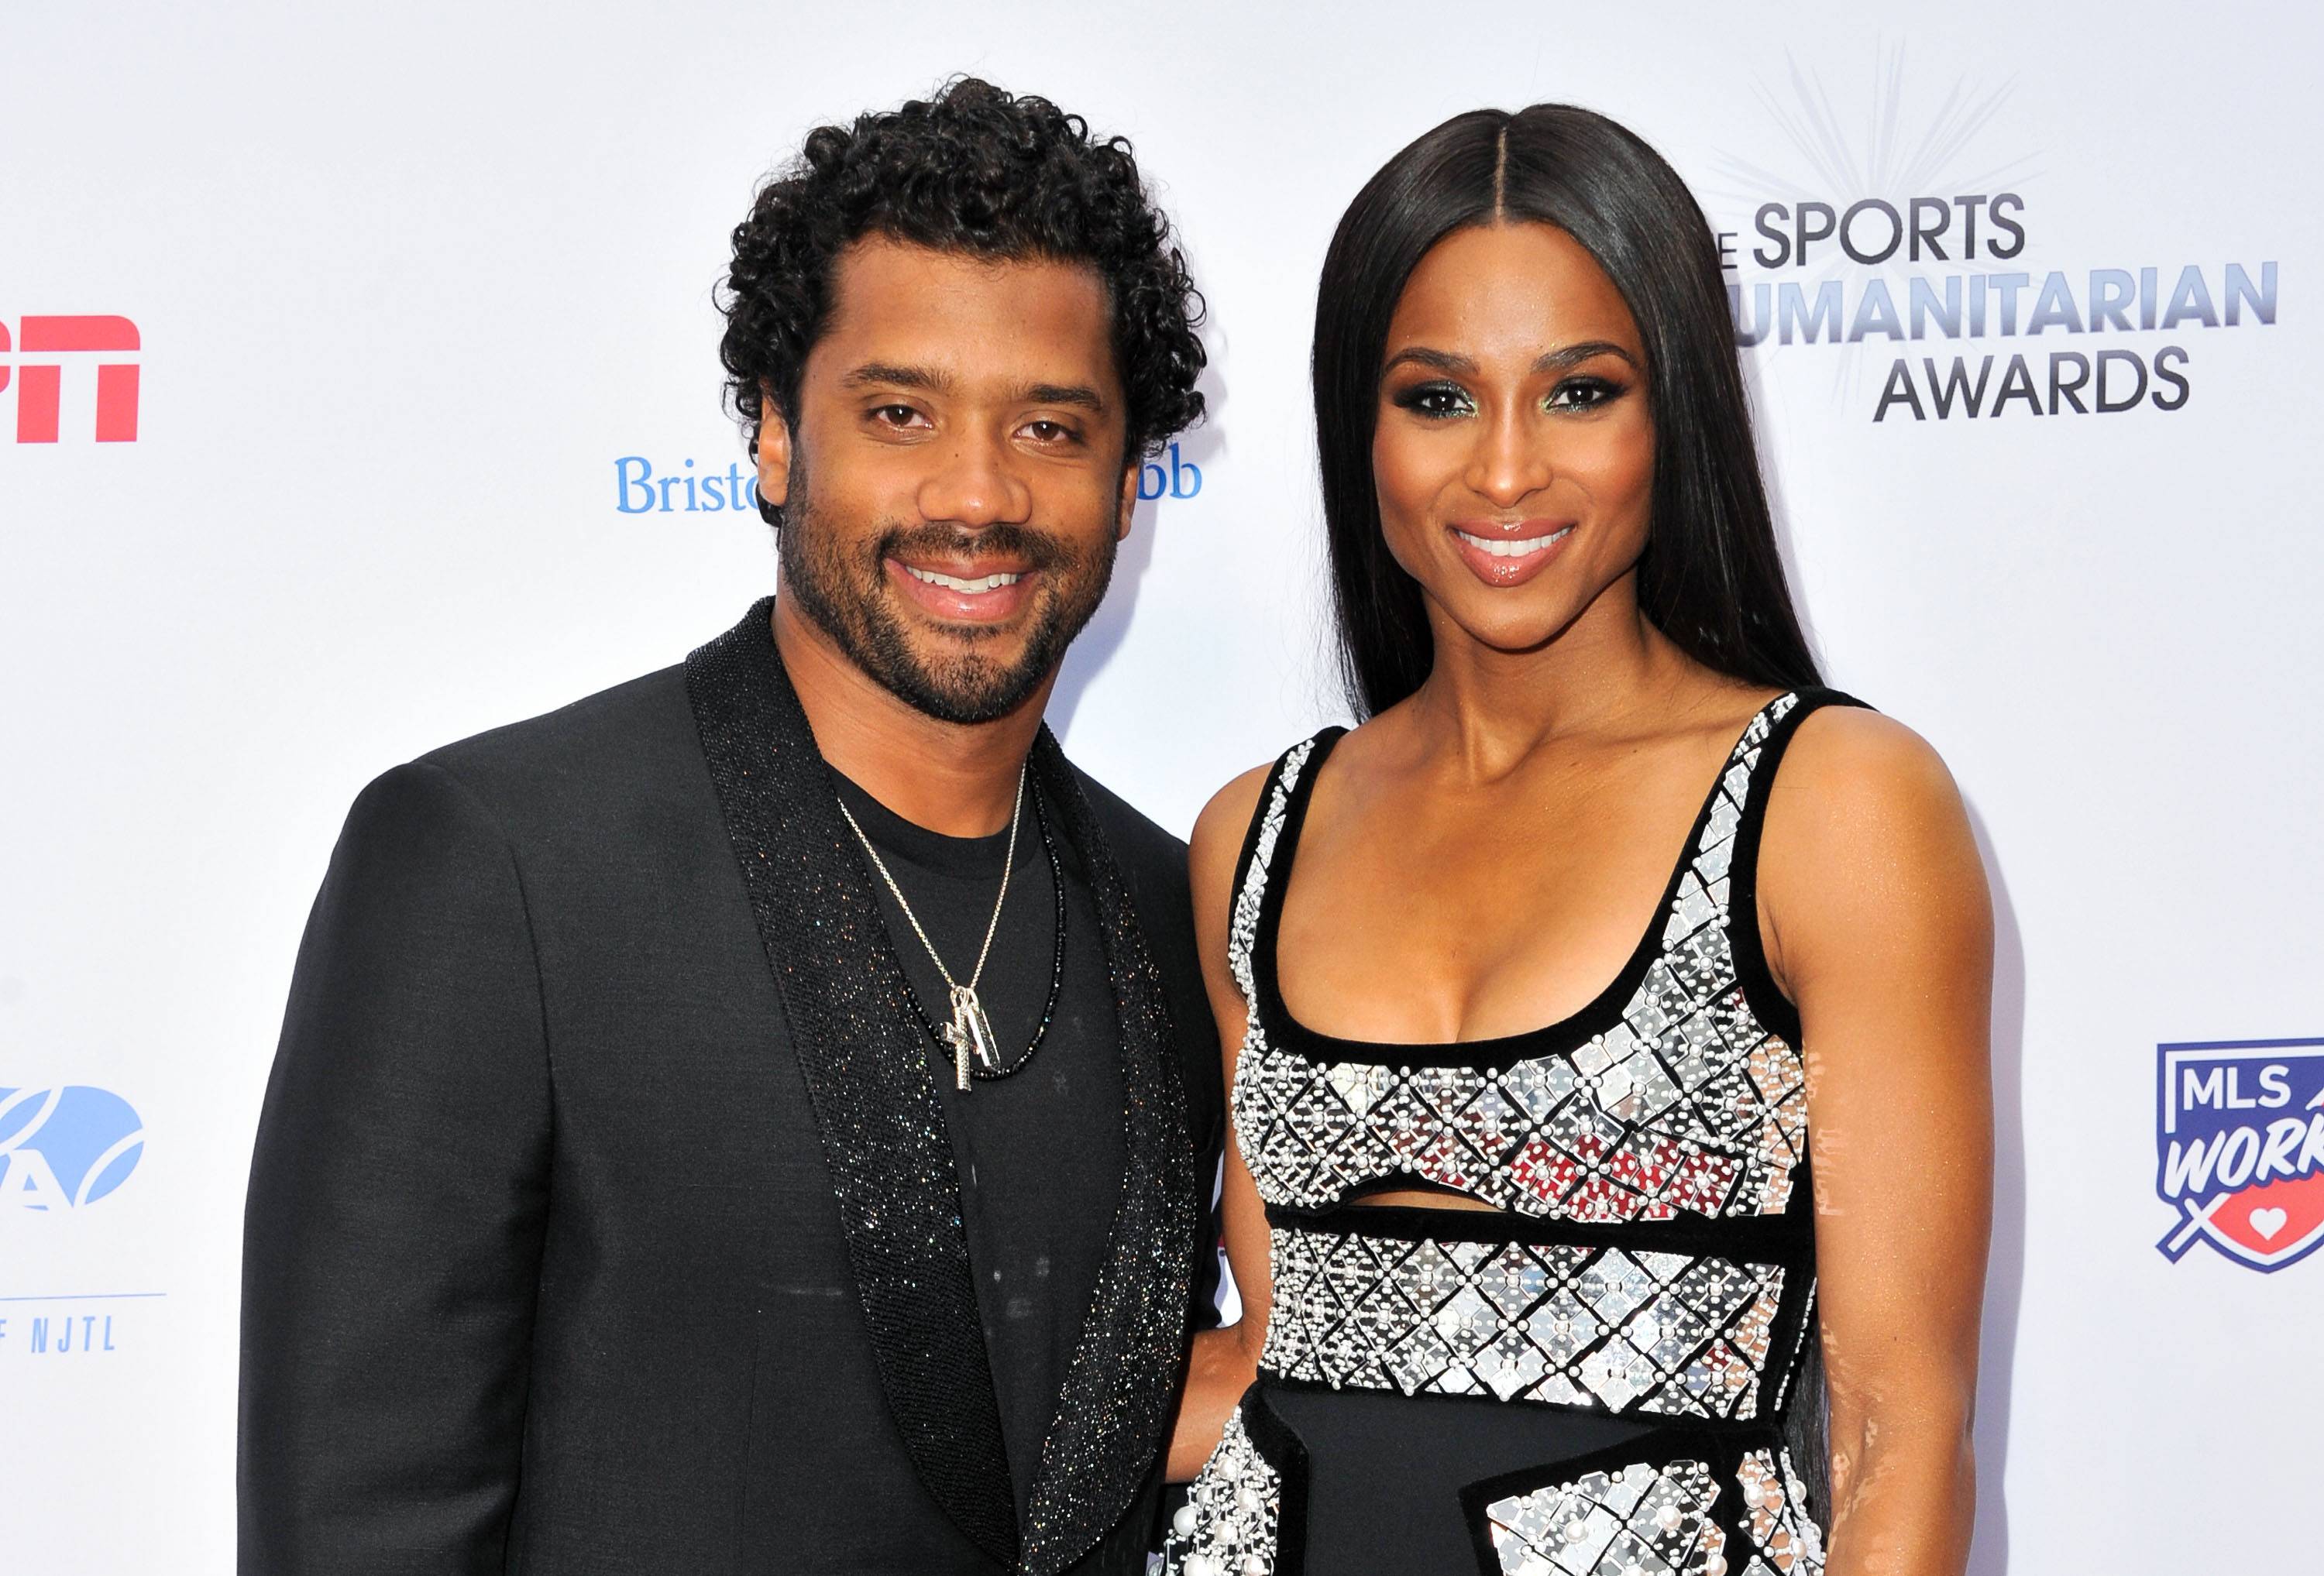 LOS ANGELES, CALIFORNIA - JULY 09: Russell Wilson and Ciara attend the 5th annual Sports Humanitarian Awards presented by ESPN at The Novo Theater at L.A. Live on July 09, 2019 in Los Angeles, California. (Photo by Allen Berezovsky/Getty Images)